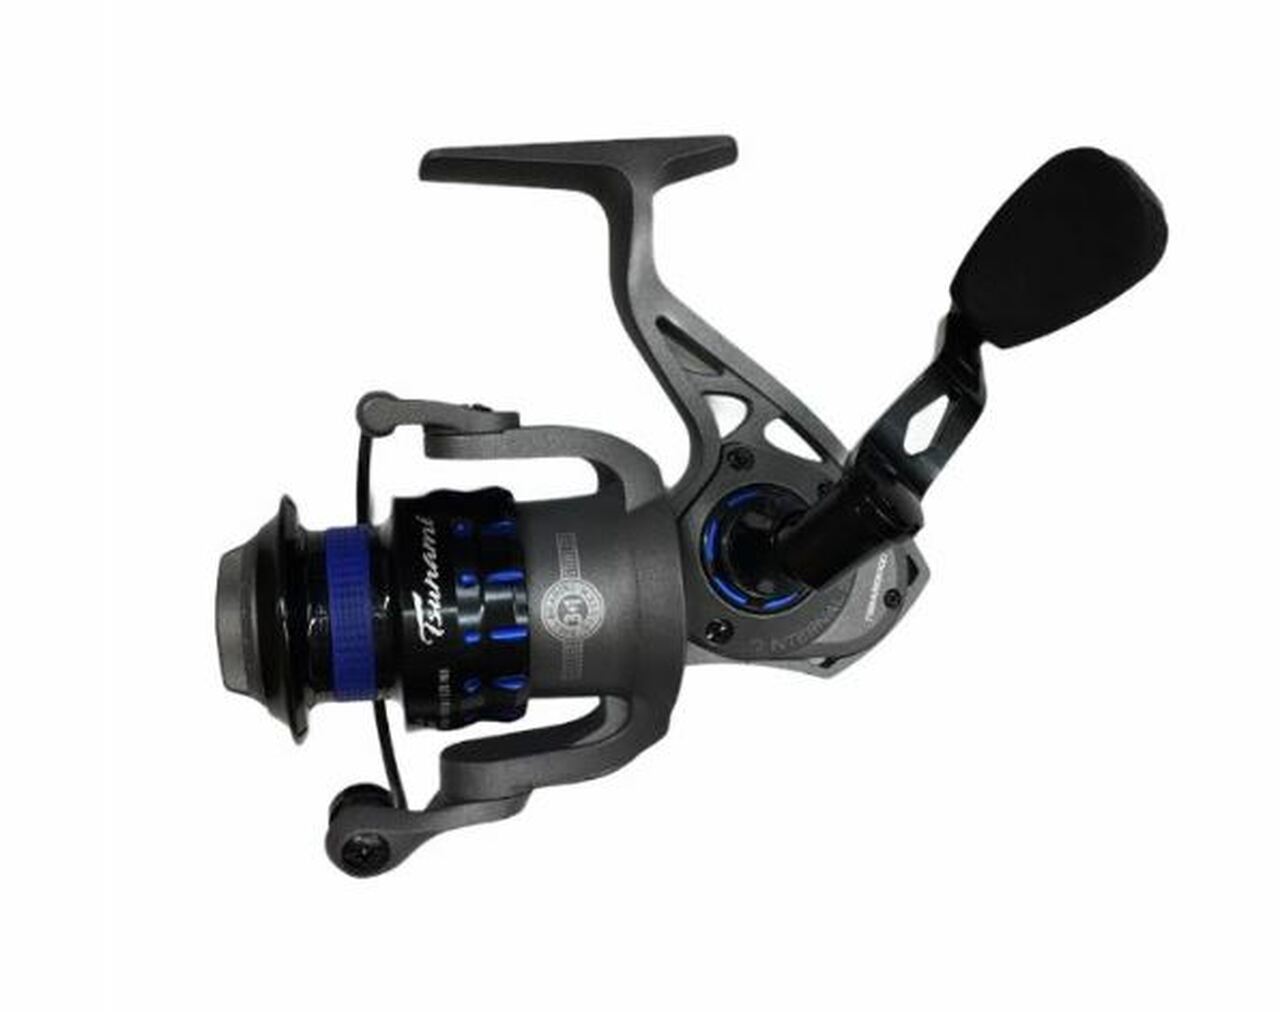 NEW Tsunami Barrier II 4000 Inshore Spinning Reel Saltwater and Braid Ready